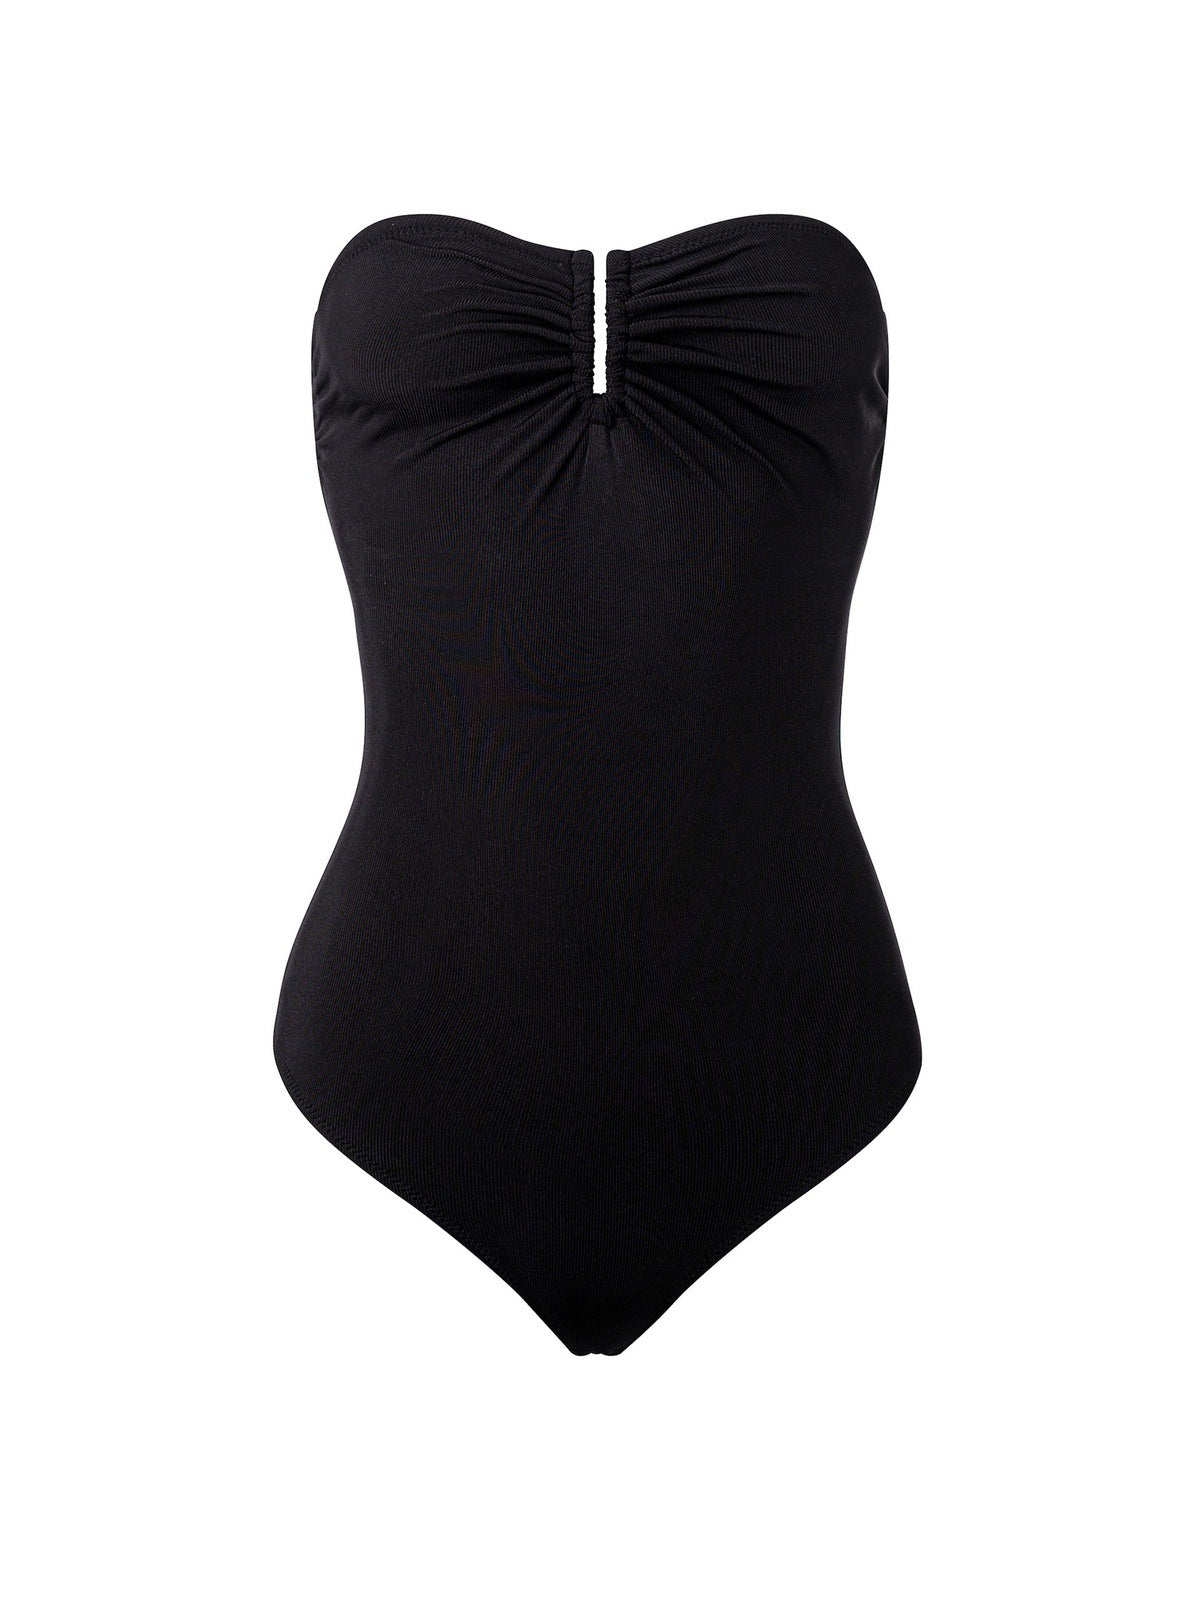 PREORDER The Marni swimsuit in Black